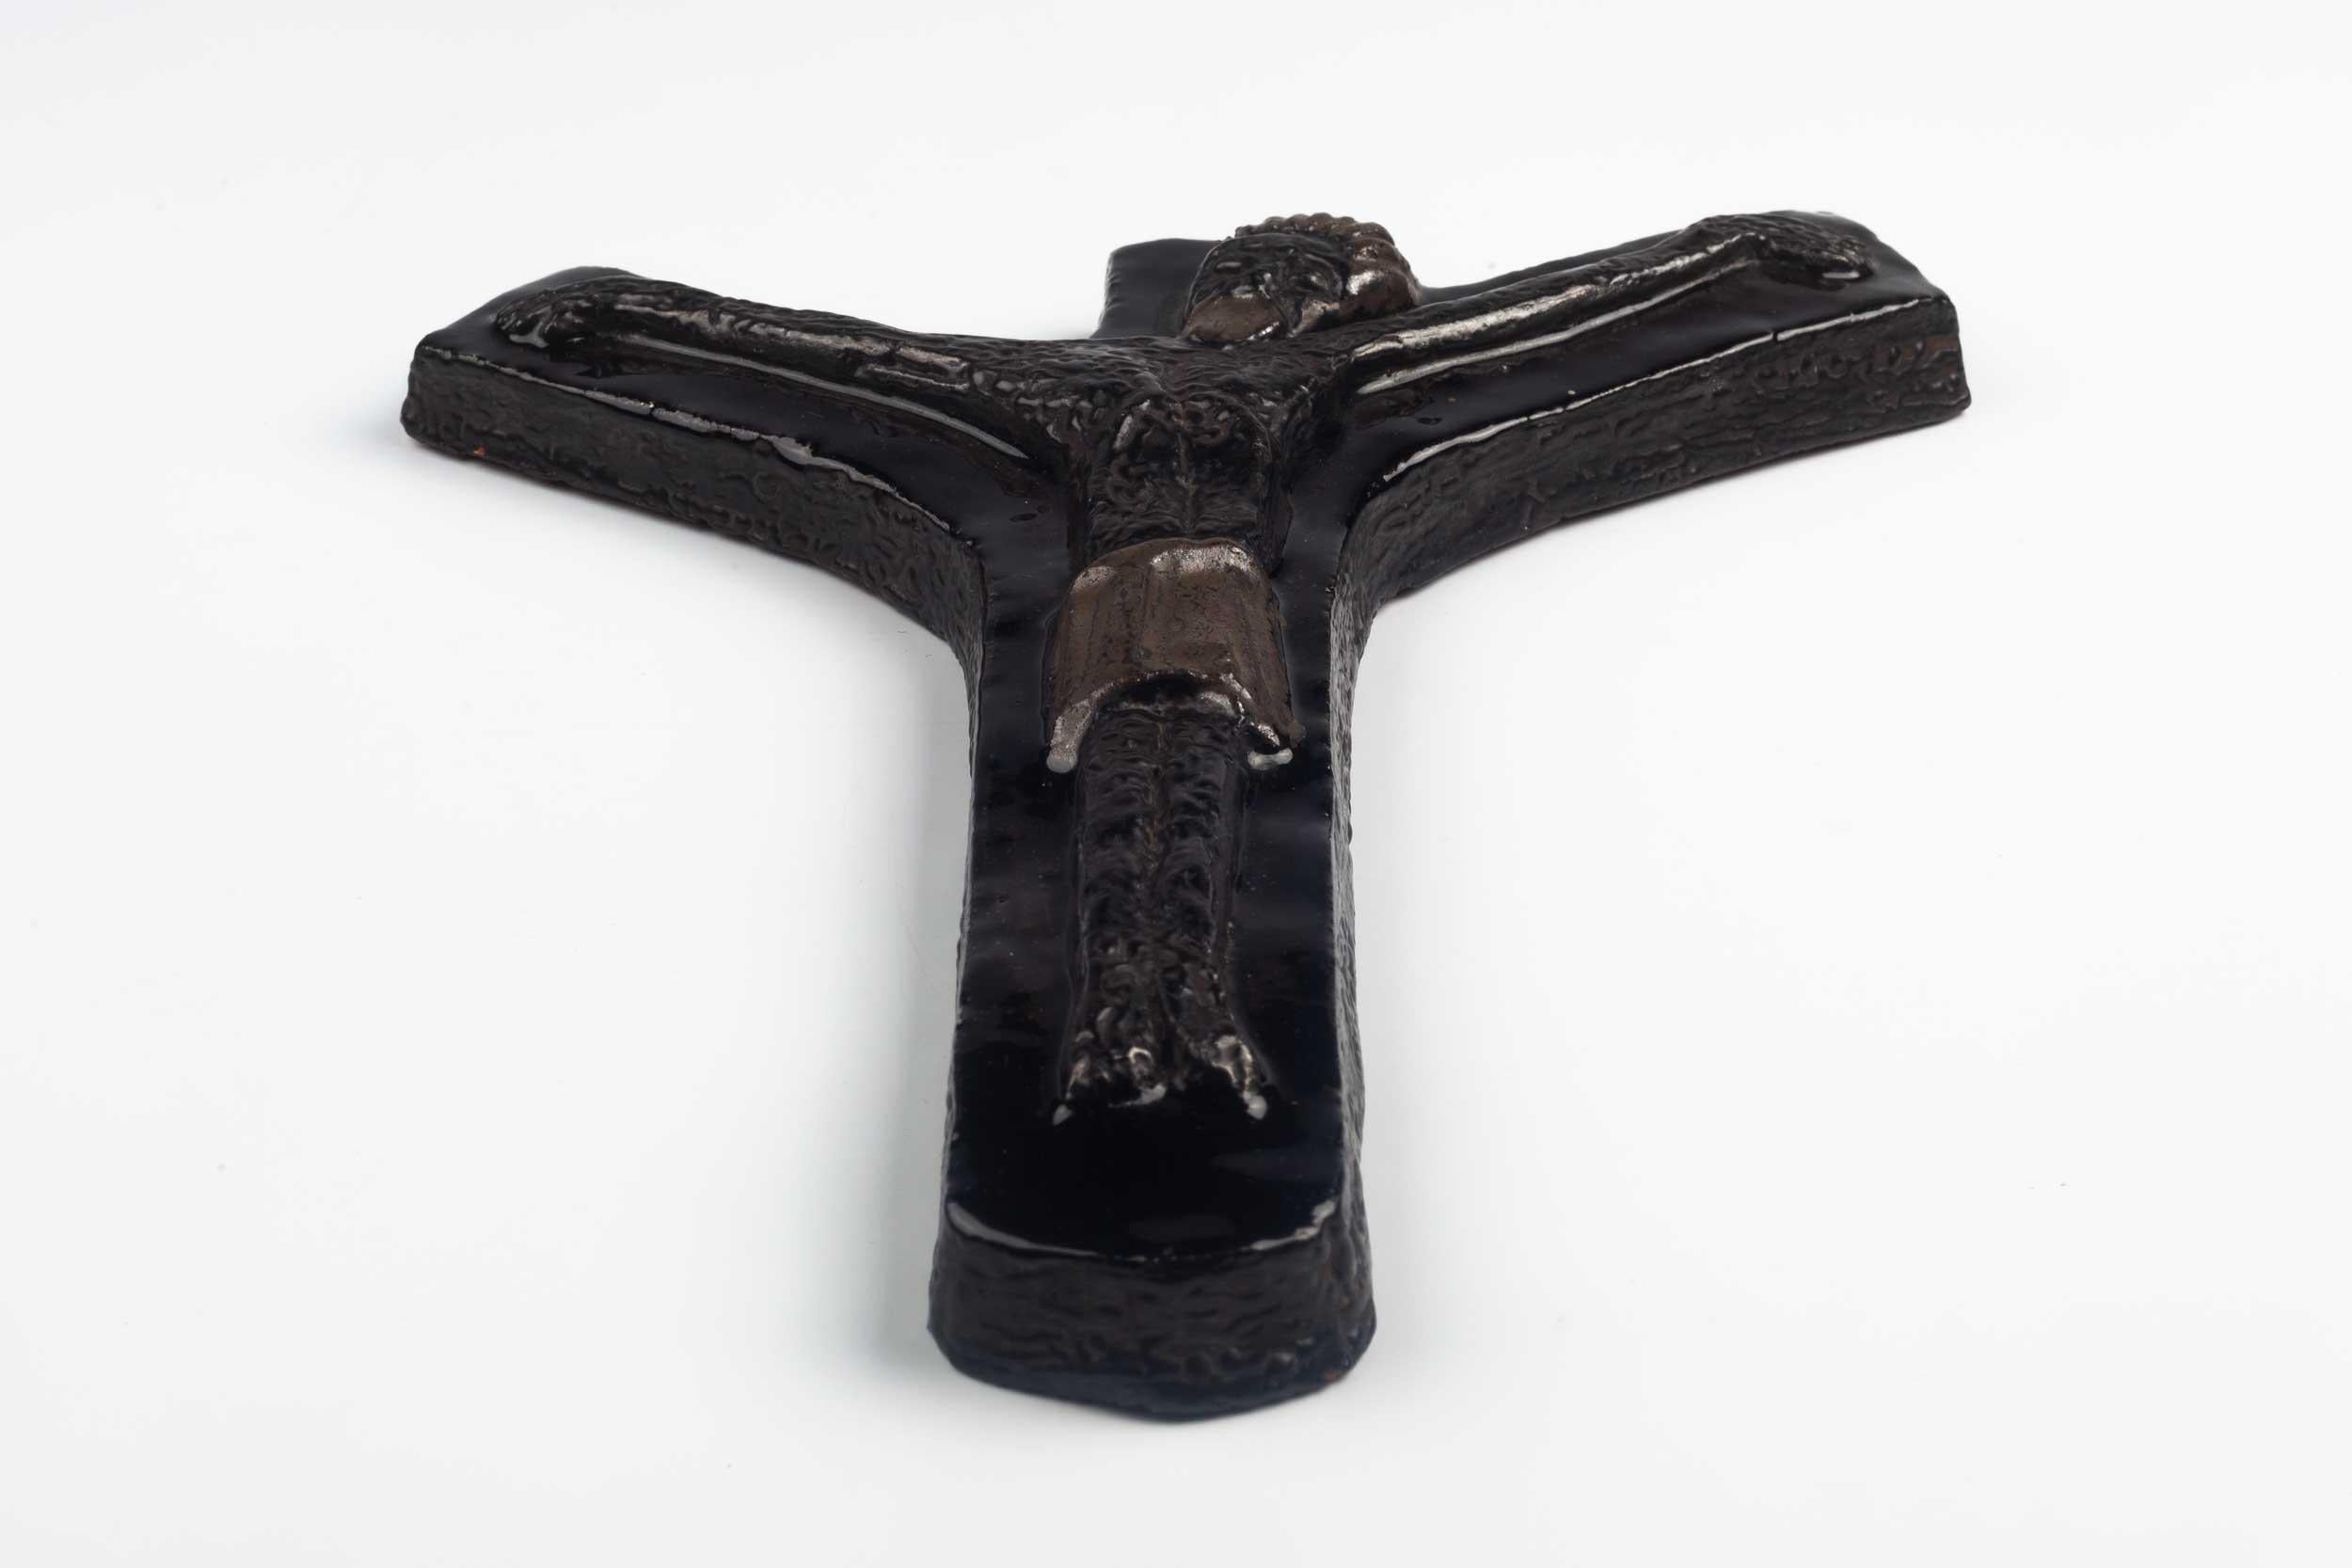 Midcentury European wall cross in dark brown with textured Christ figure in volume. From a large collection of vintage crosses handmade by Flemish artisans

From modernism to brutalism, the crosses in our collection range from being as futurist as